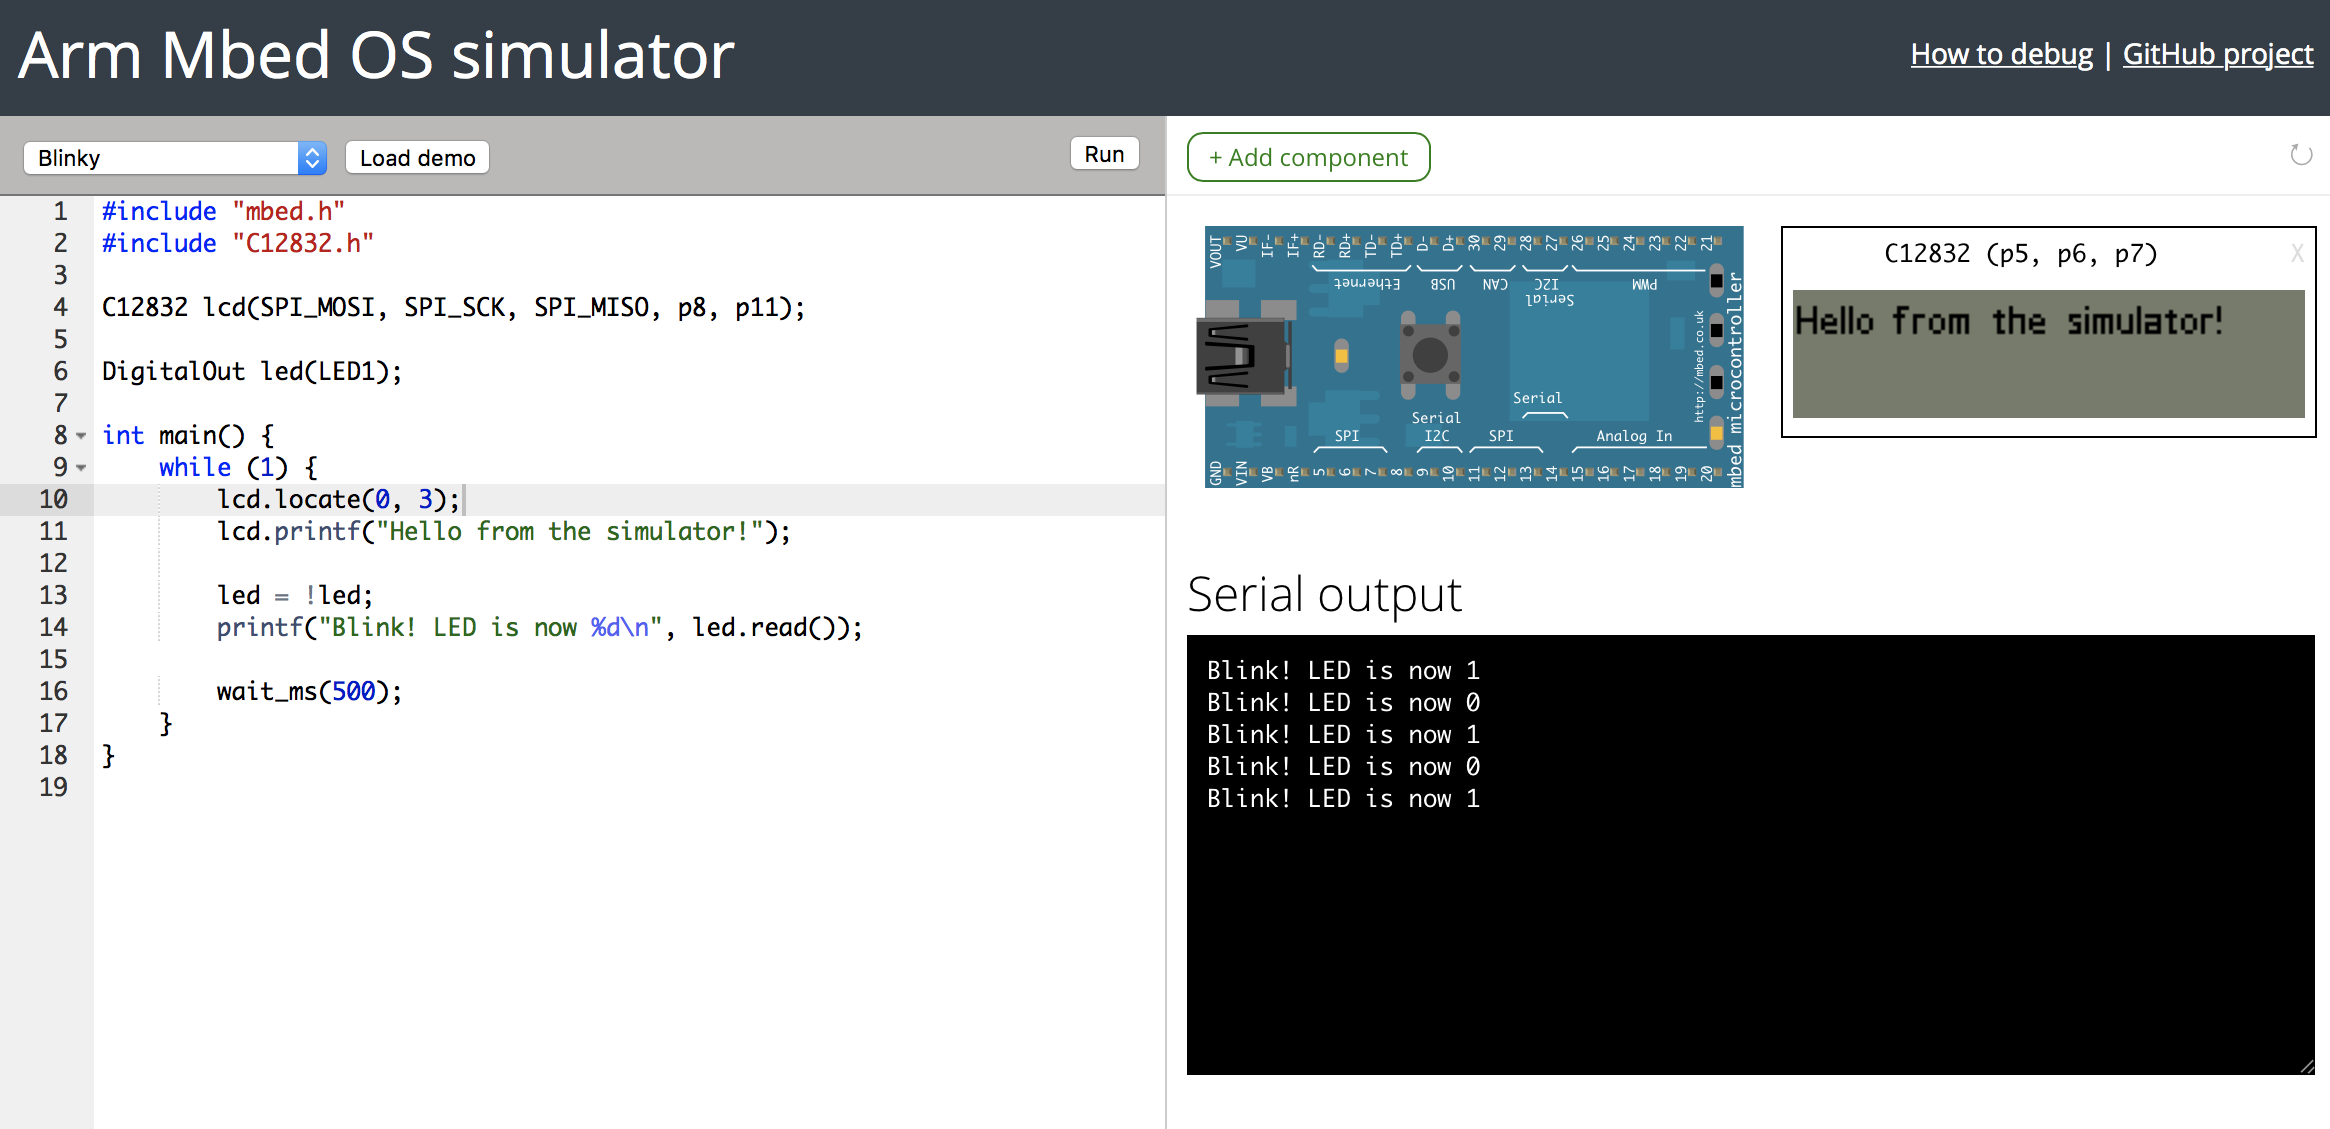 The Mbed Simulator online environment running Blinky and showing the C12832 LCD display